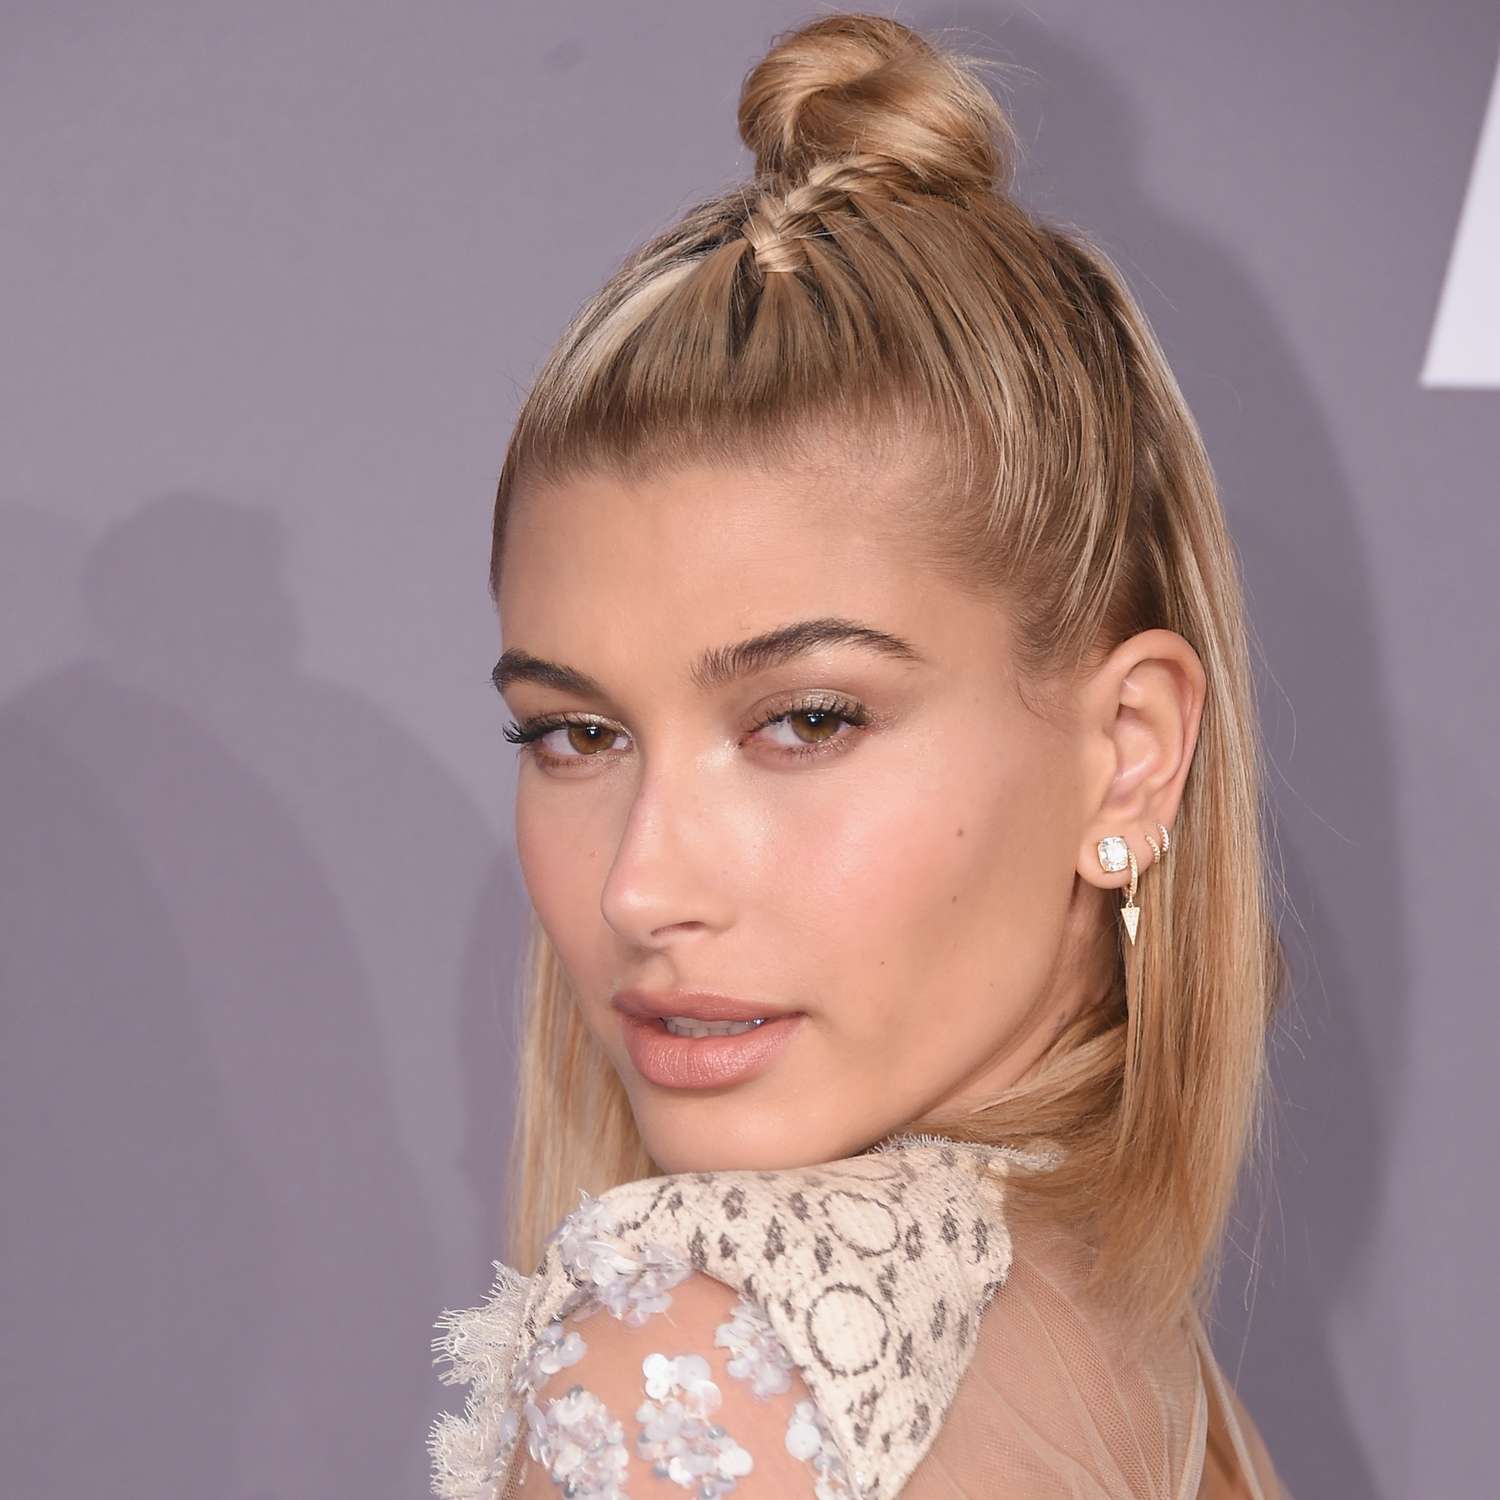 Hailey Bieber looking over shoulder at camera, zoomed in on face with short blonde straight bob and top section pulled back tightly with braid going back into a twisted bun on top of head